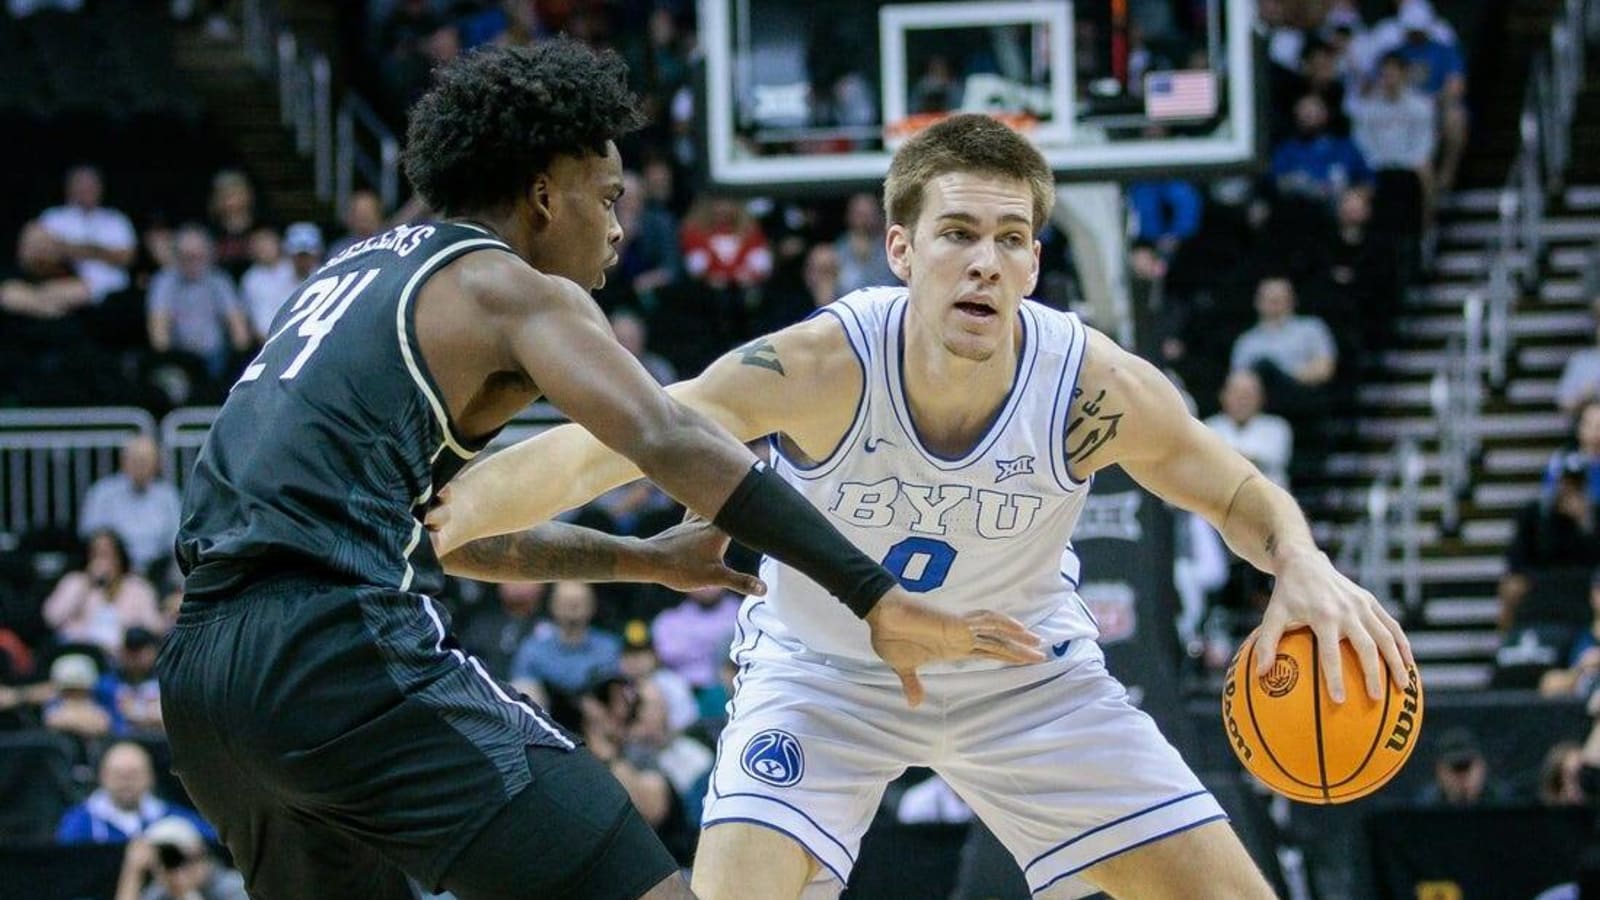 No. 20 BYU cruises past UCF in wire-to-wire victory